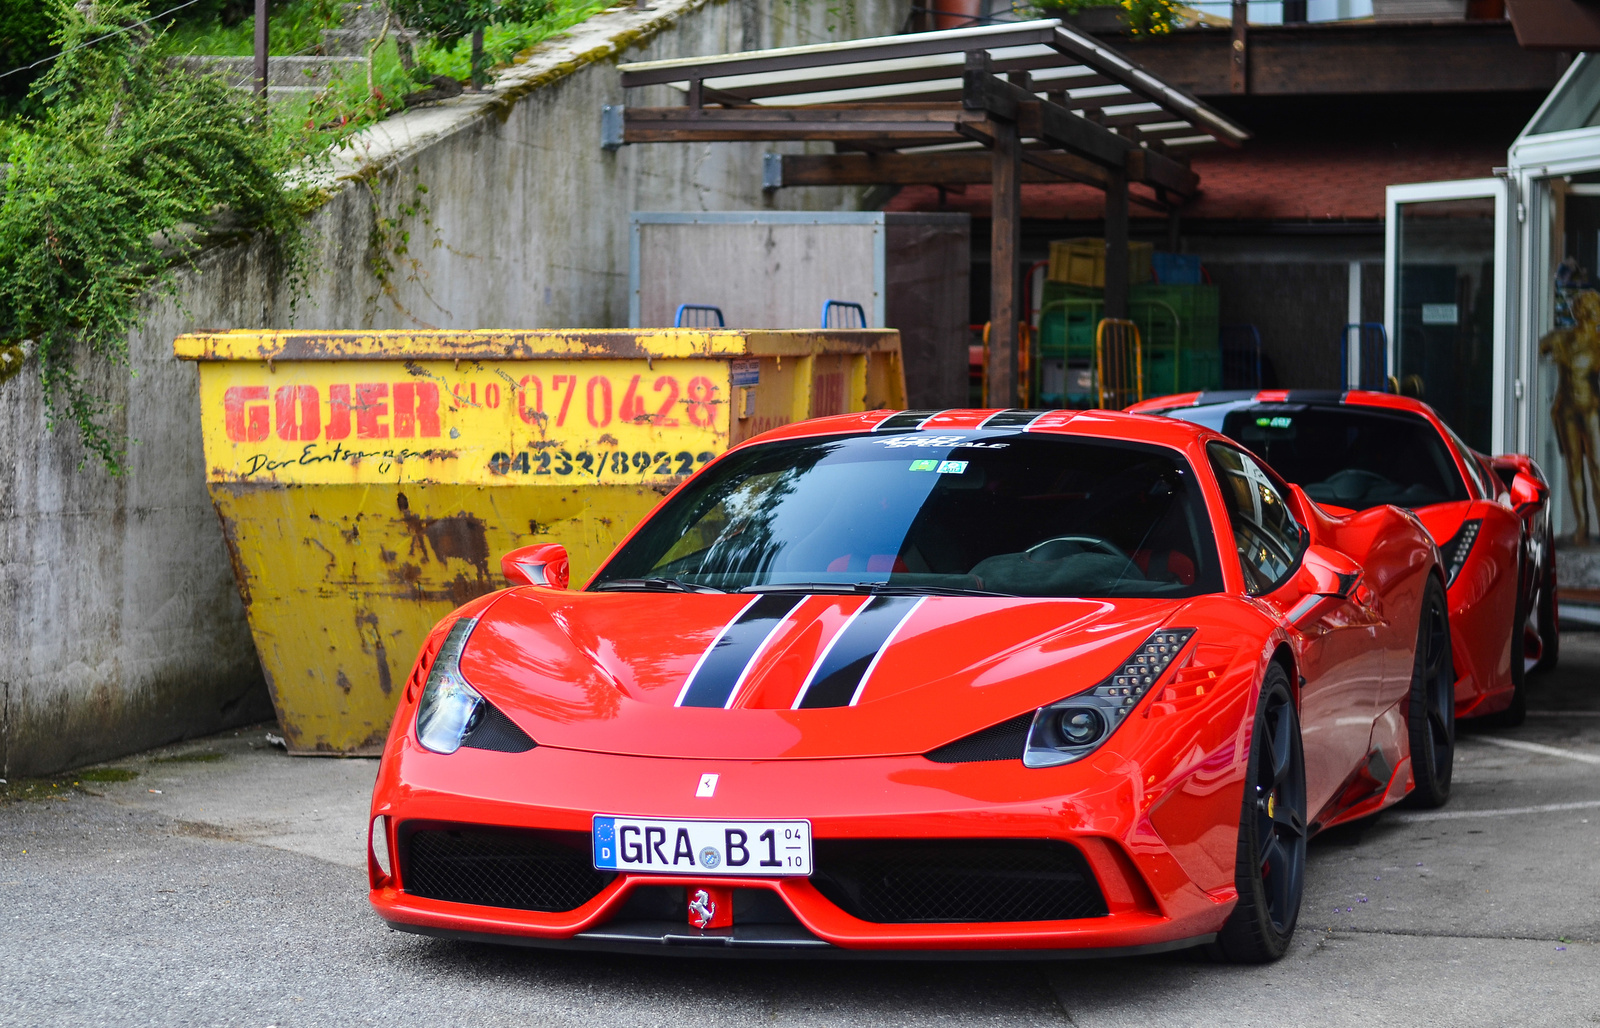 Speciale.